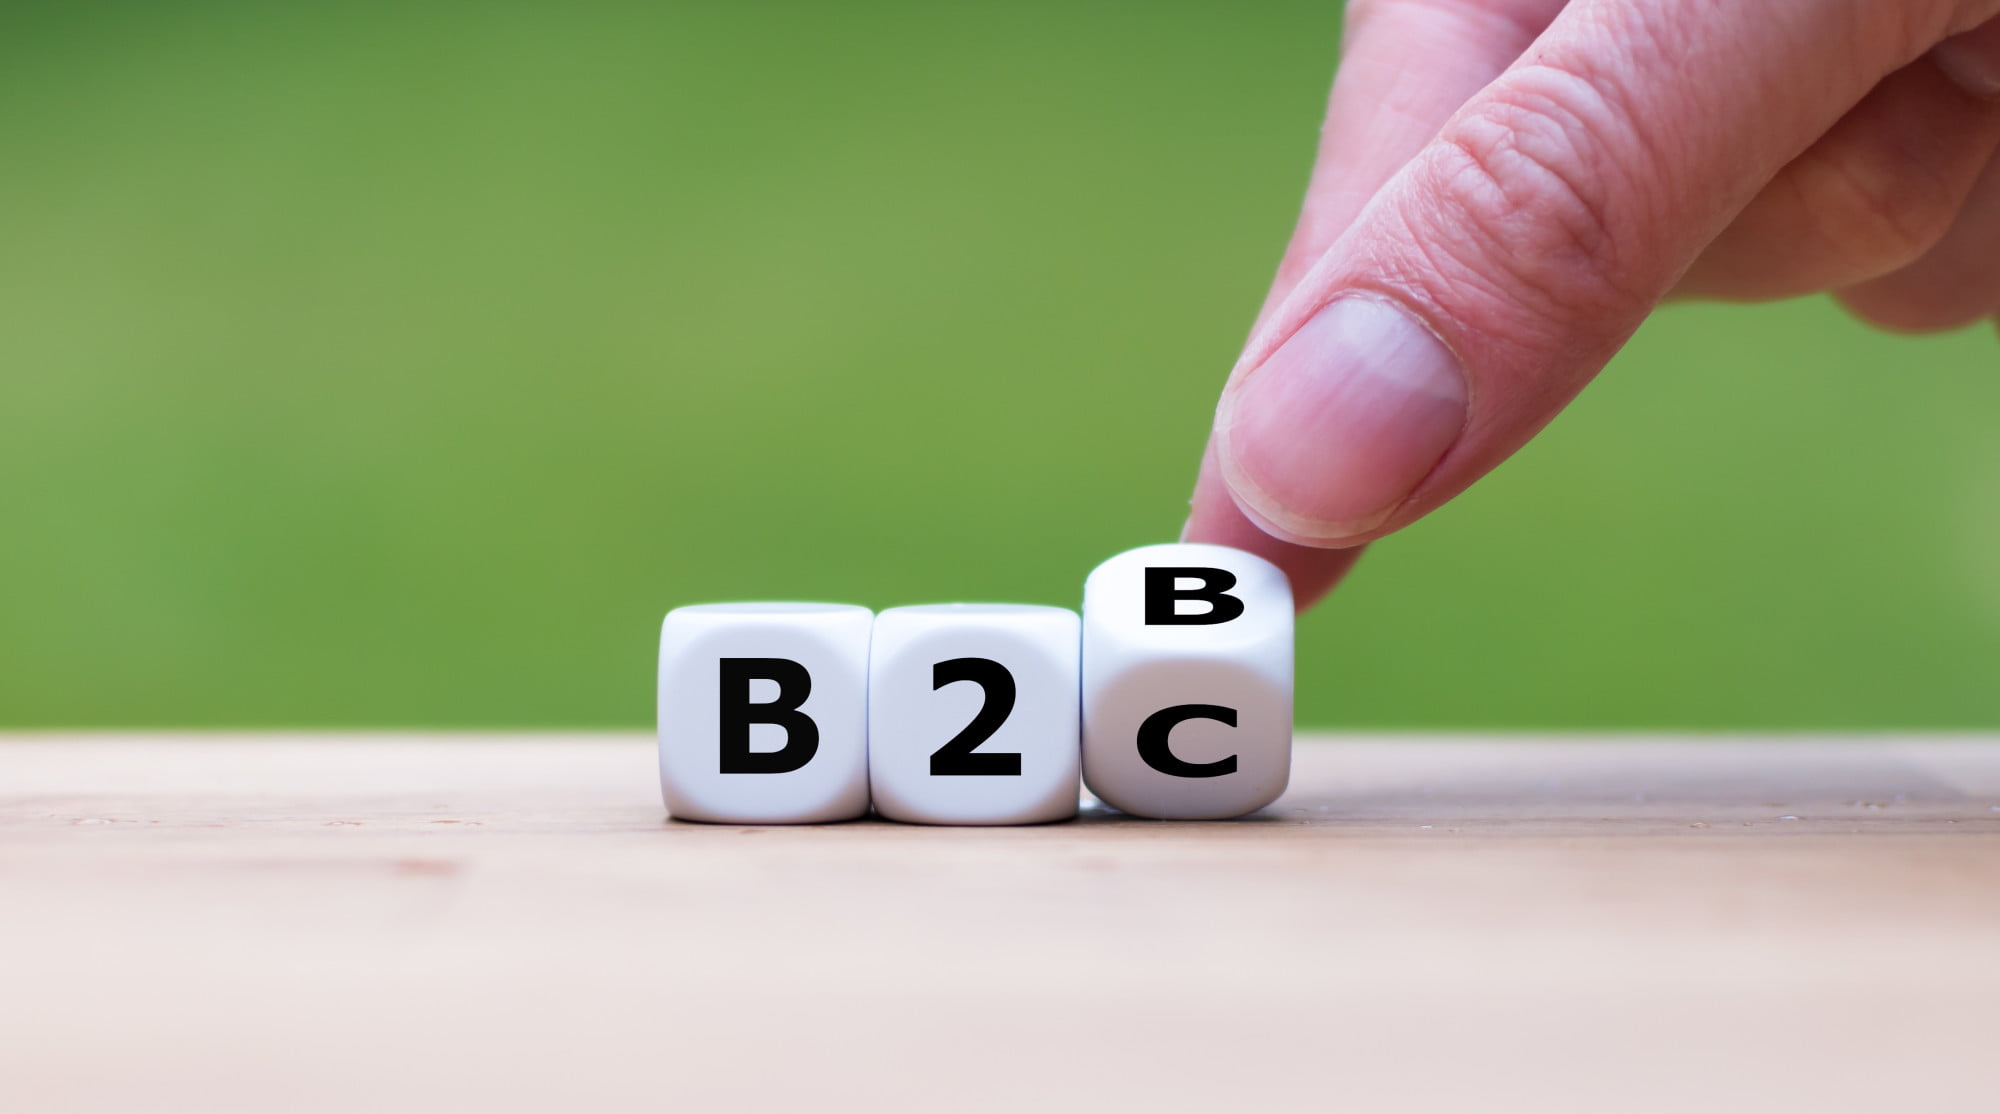 How much do you know about the differences between b2b vs. b2c sales? Read on to get a clear understanding of the differences between them.